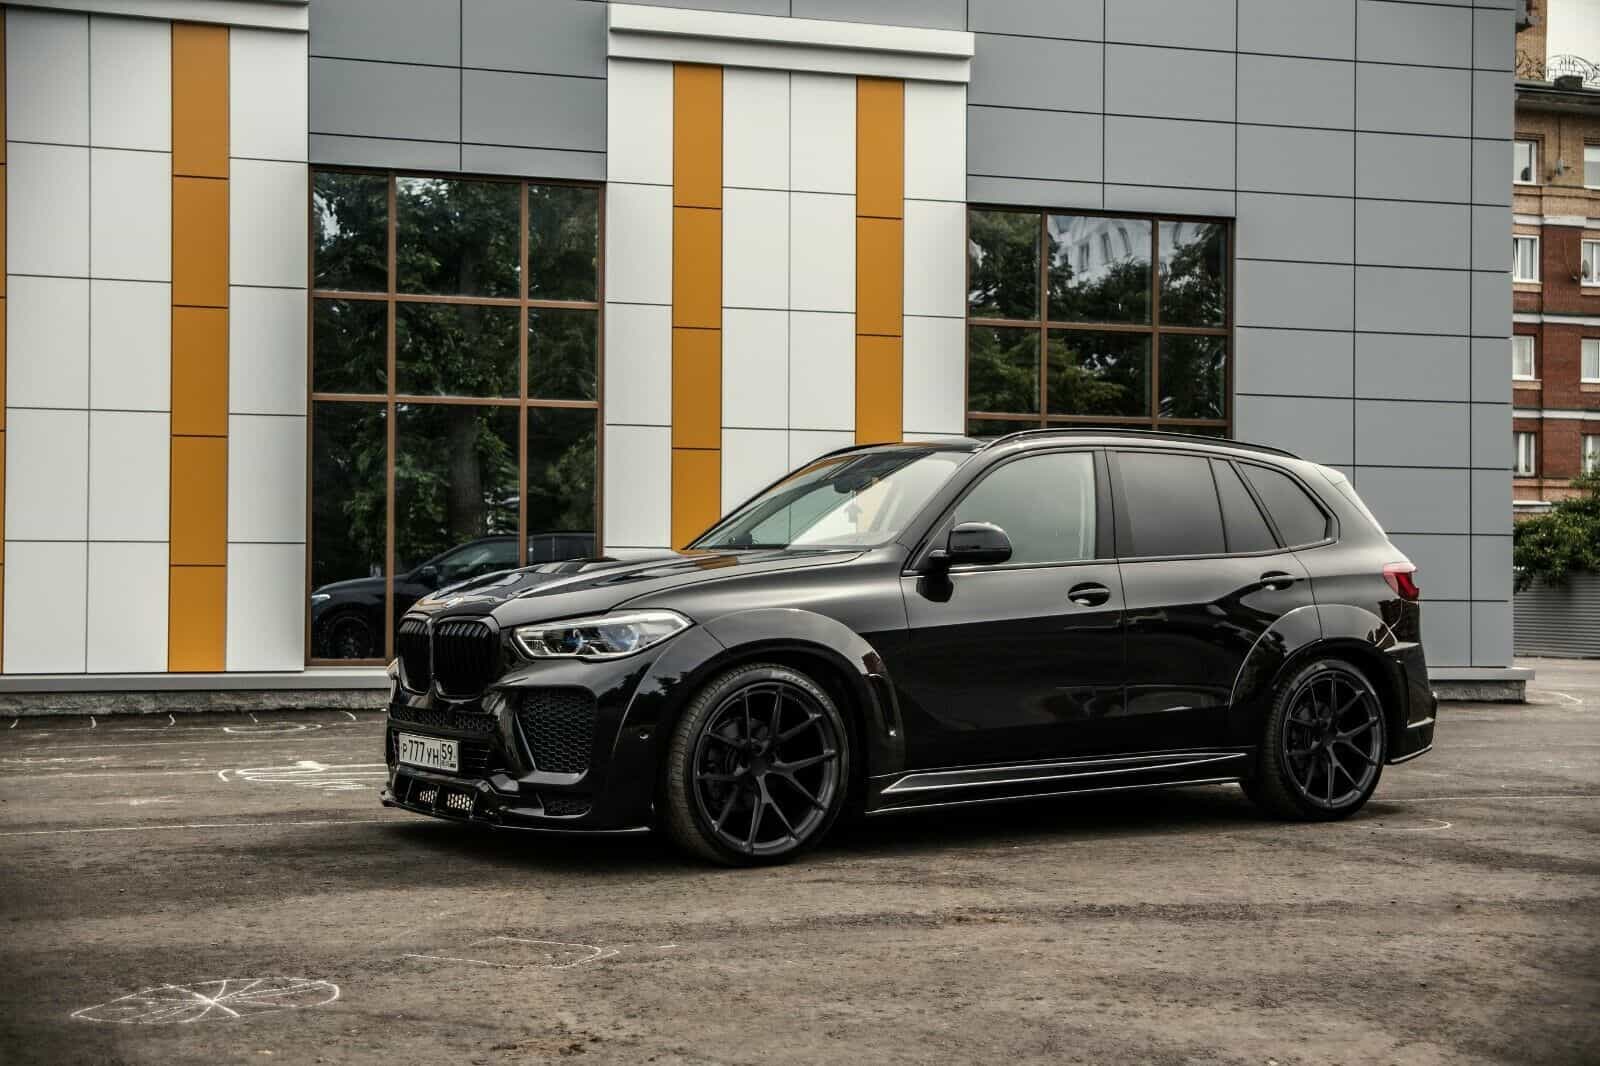 The BMW X5 G05 with a tuning body kit made by “Renegade-Design